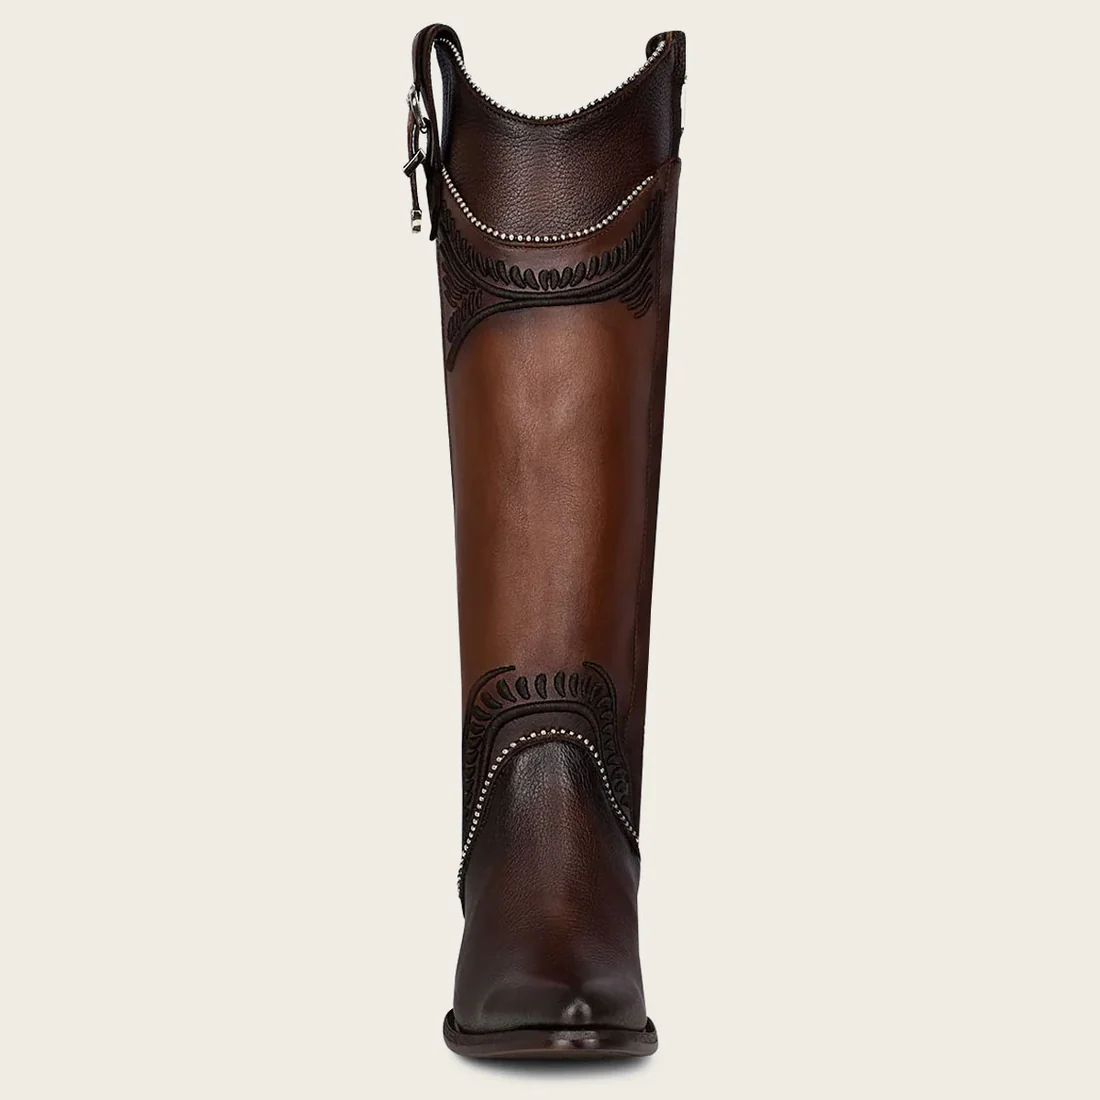 Cuadra | Hand Painted Embroidered Honey Leather Boot